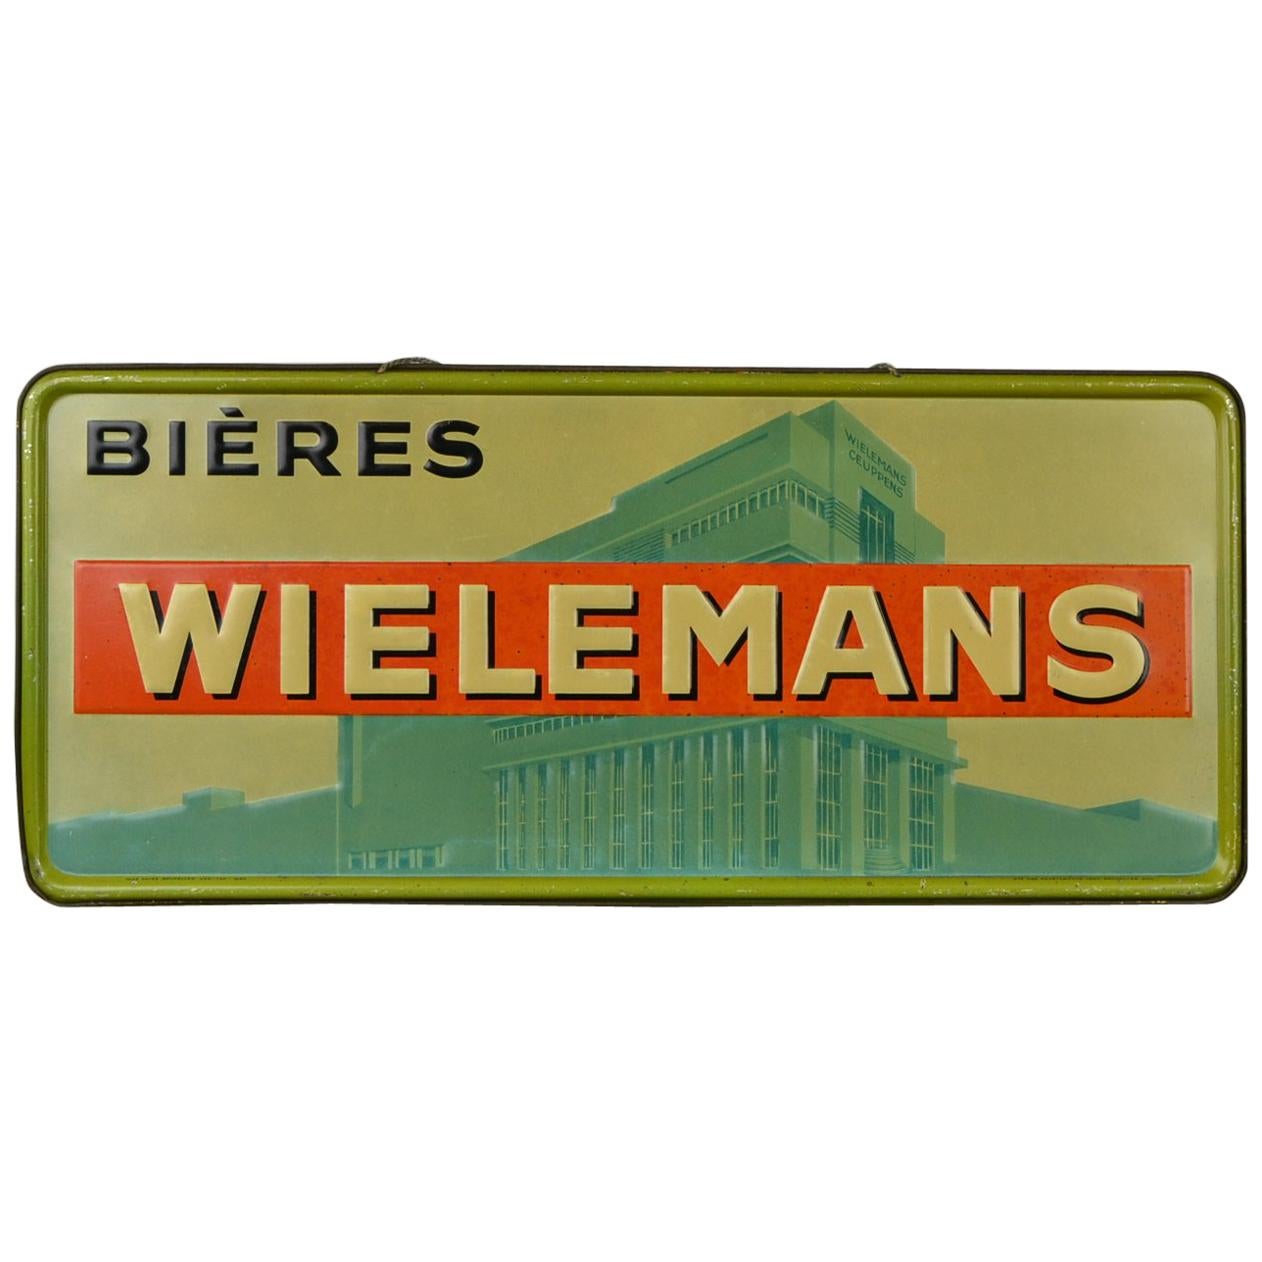 1930s Tin Advertising Sign for Belgian Beer Wielemans